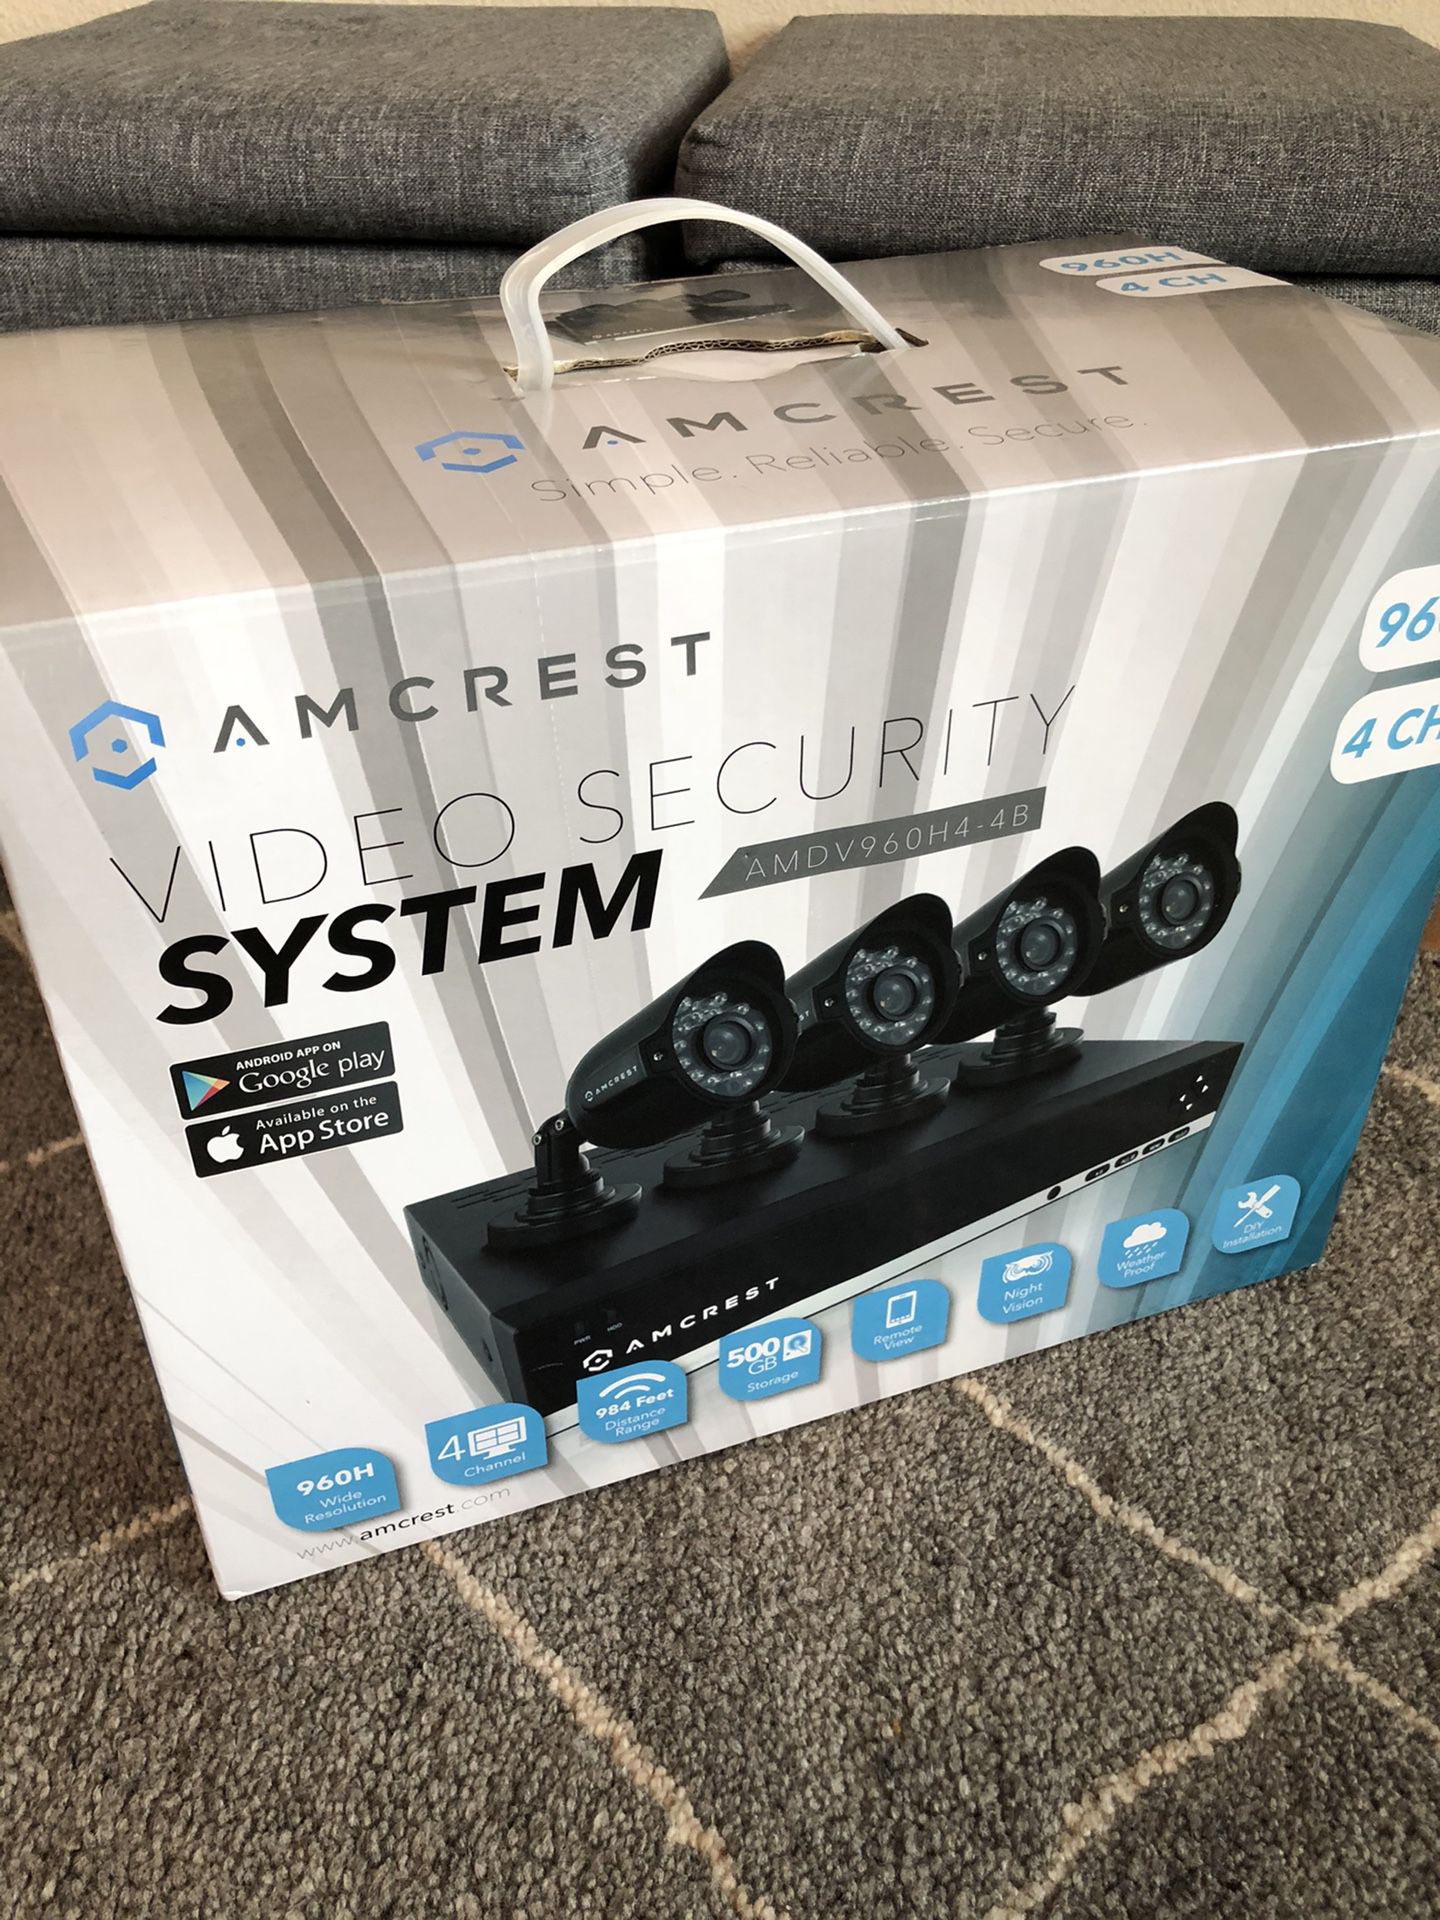 Brand new Video Security System Amcrest 960h4